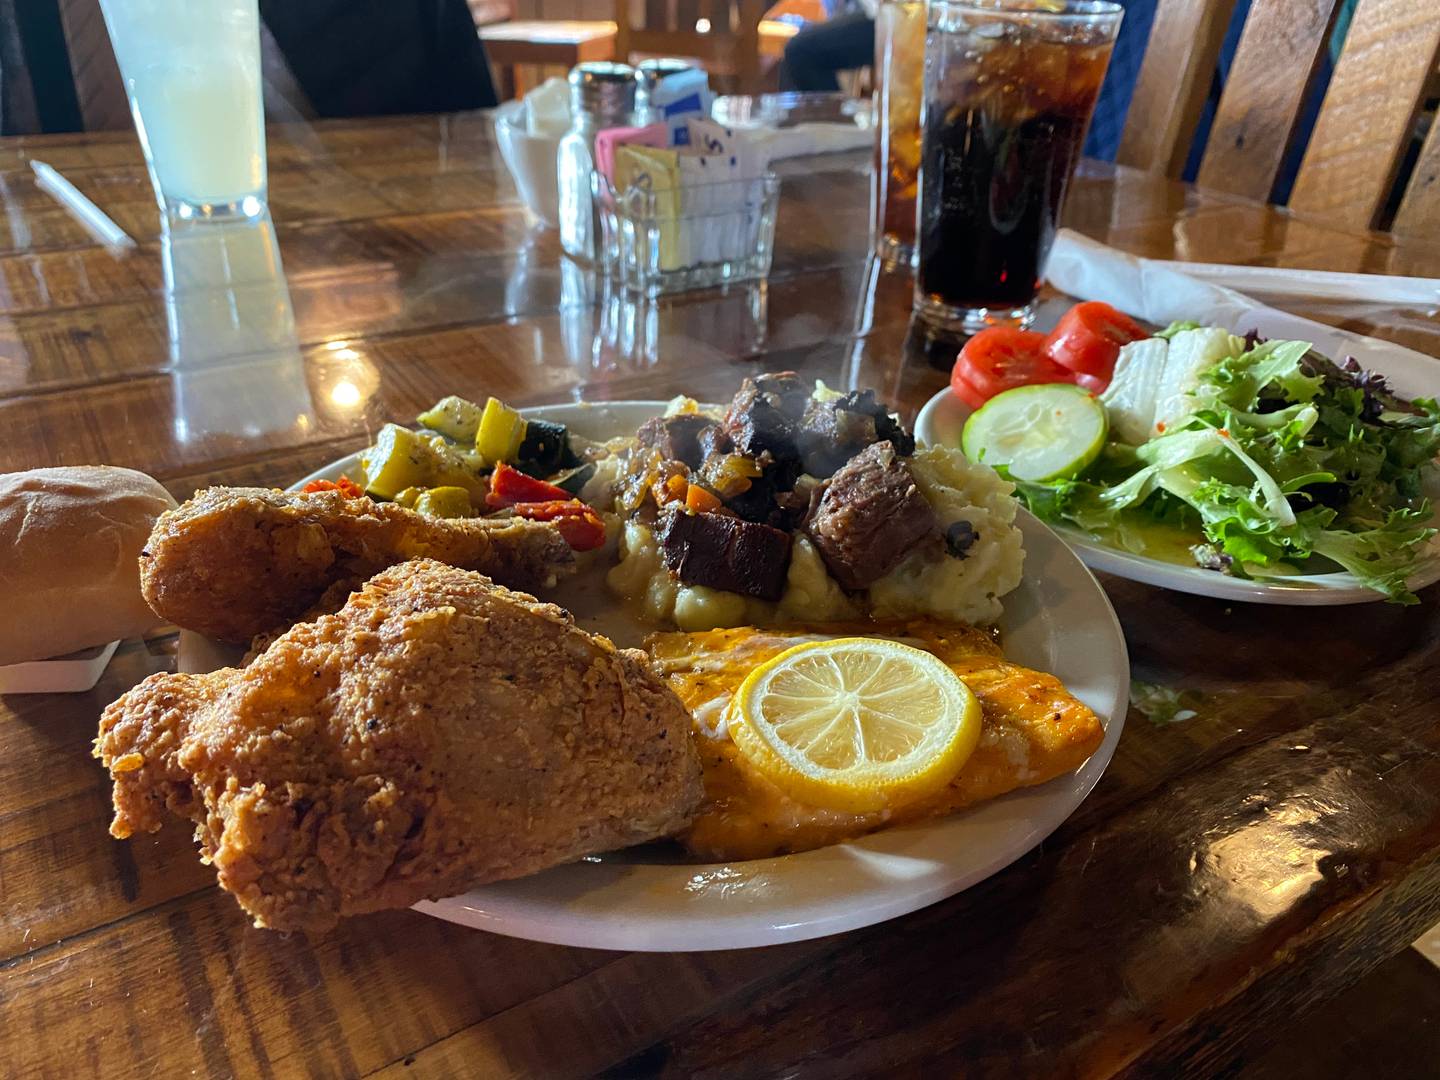 A salad and dinner roll sit beside a plate including fried chicken, oven-roasted vegetables, mashed potatoes topped with pot roast and a citrus salmon fillet, all on the Sunday brunch buffet at Starved Rock Lodge.